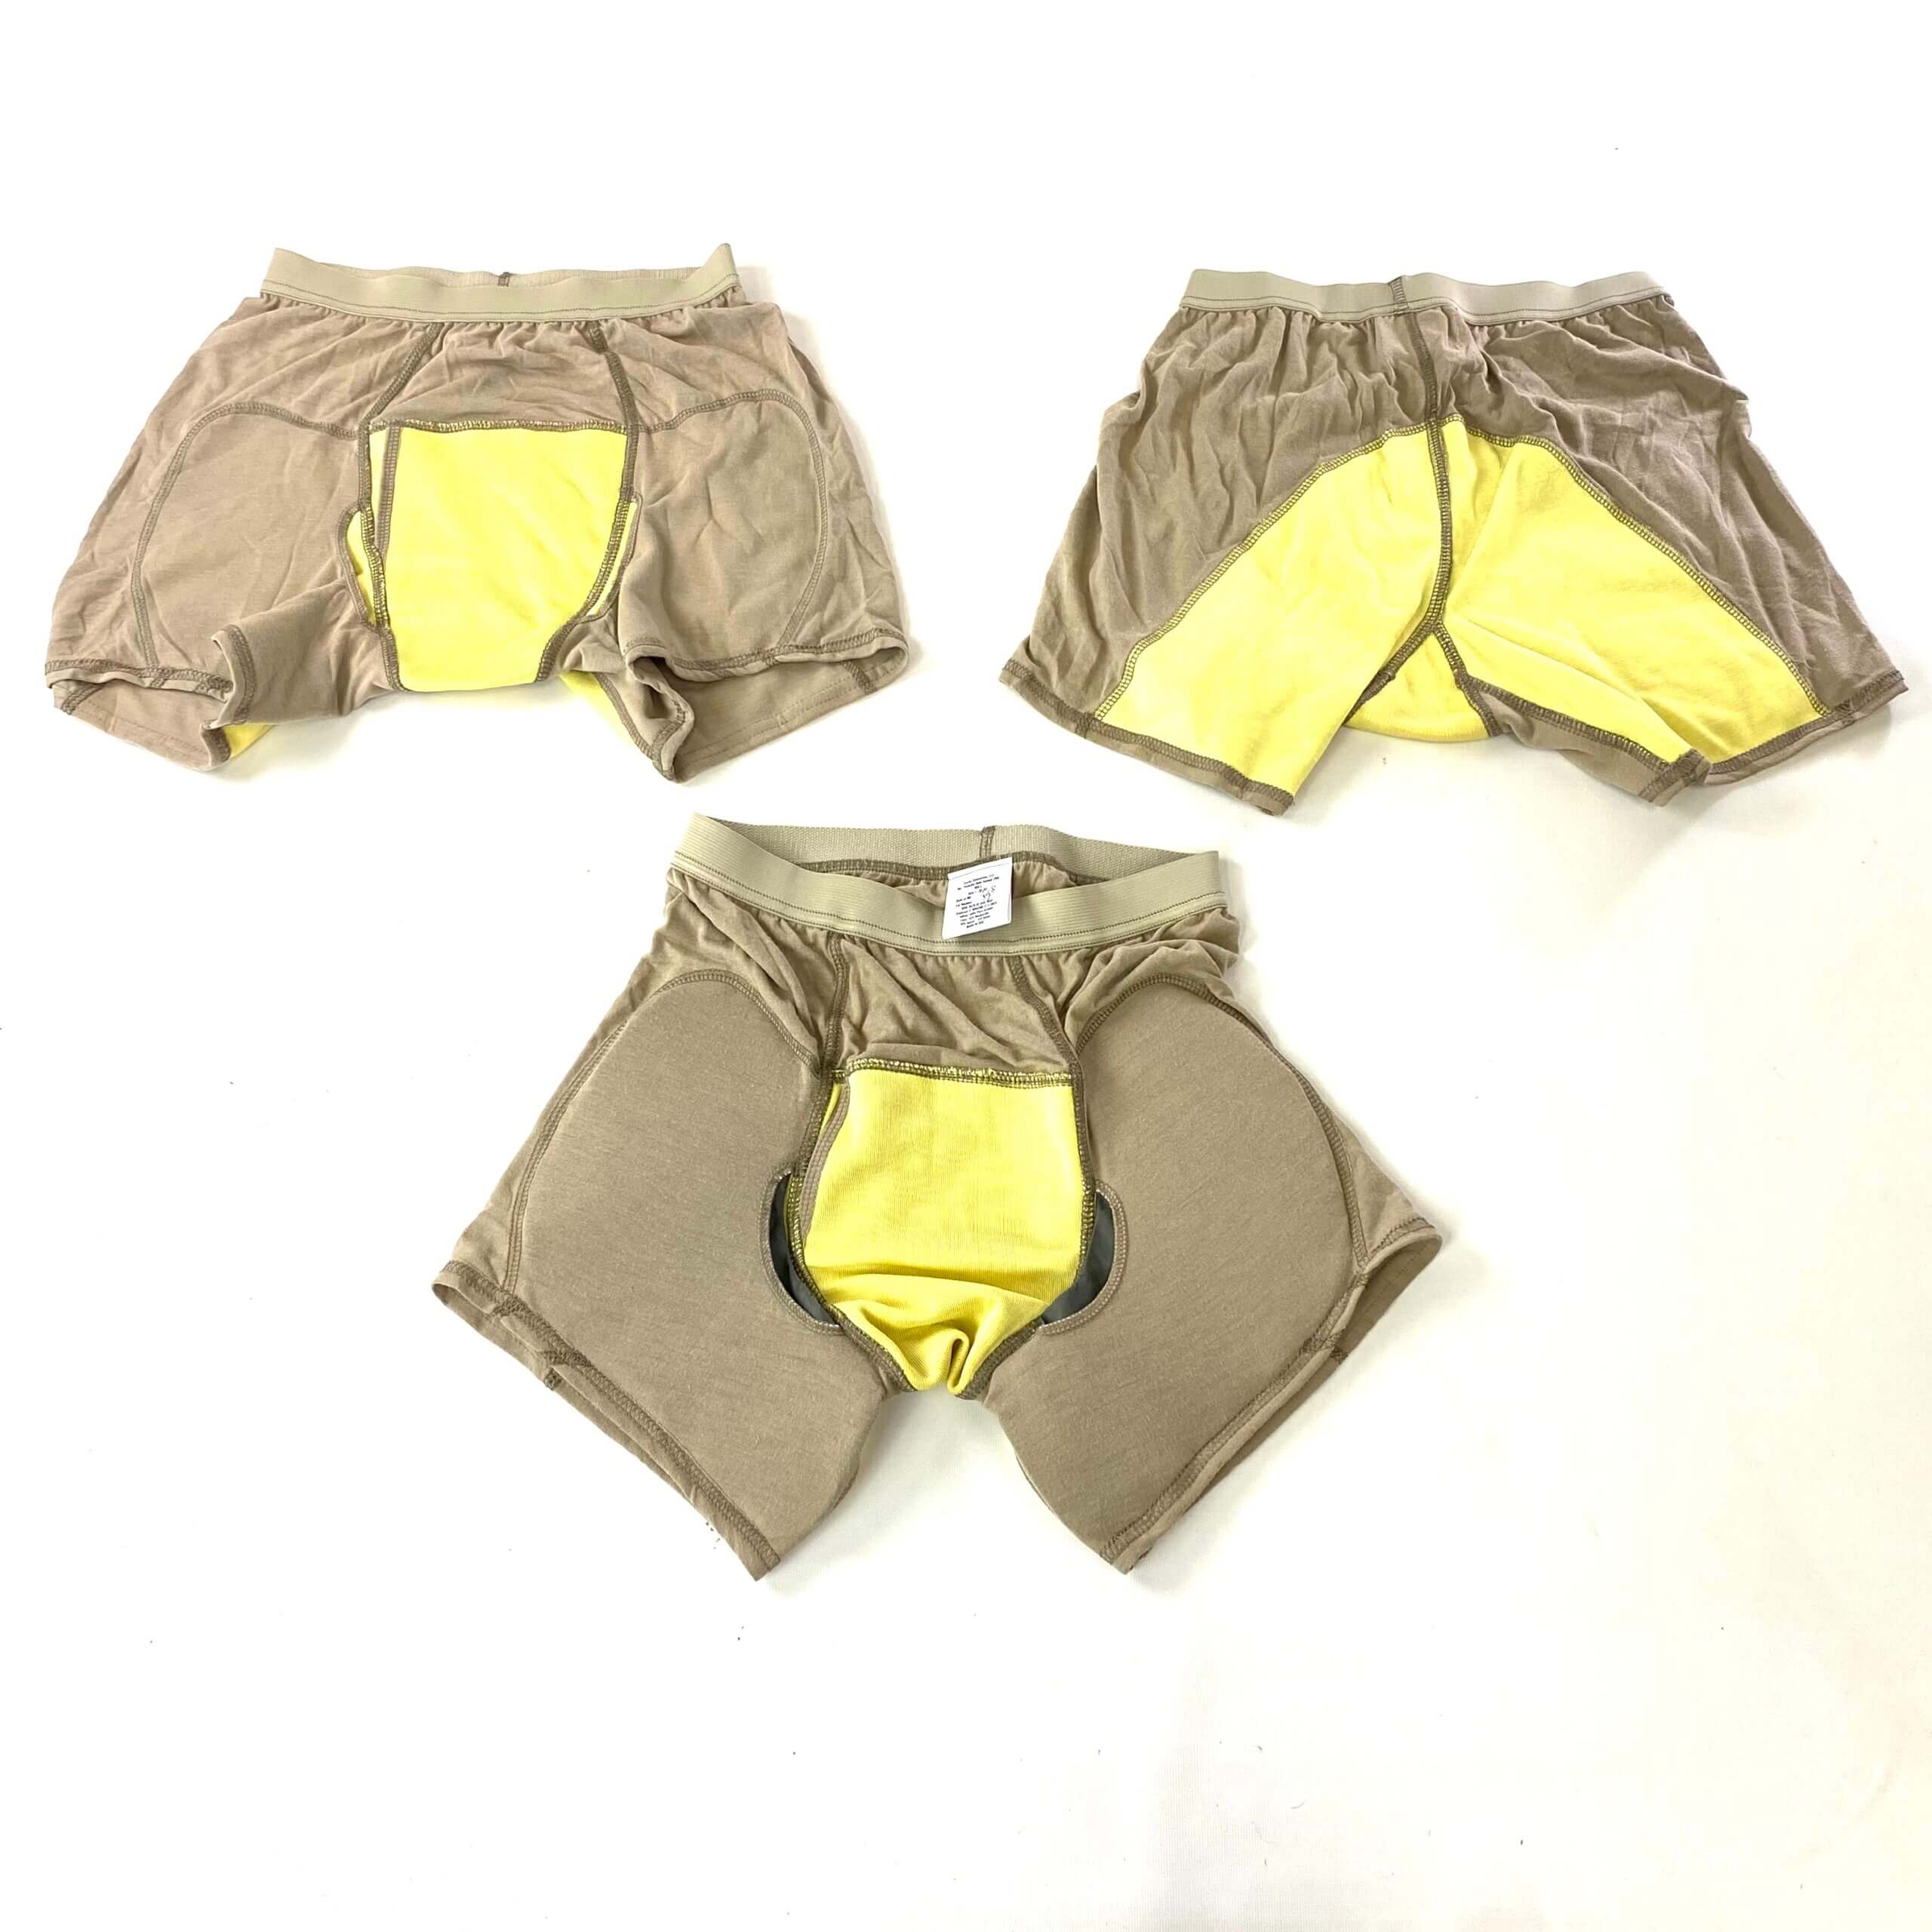 USGI Tan Tier 1 Protective Under Garment With Insert, 3 Pack